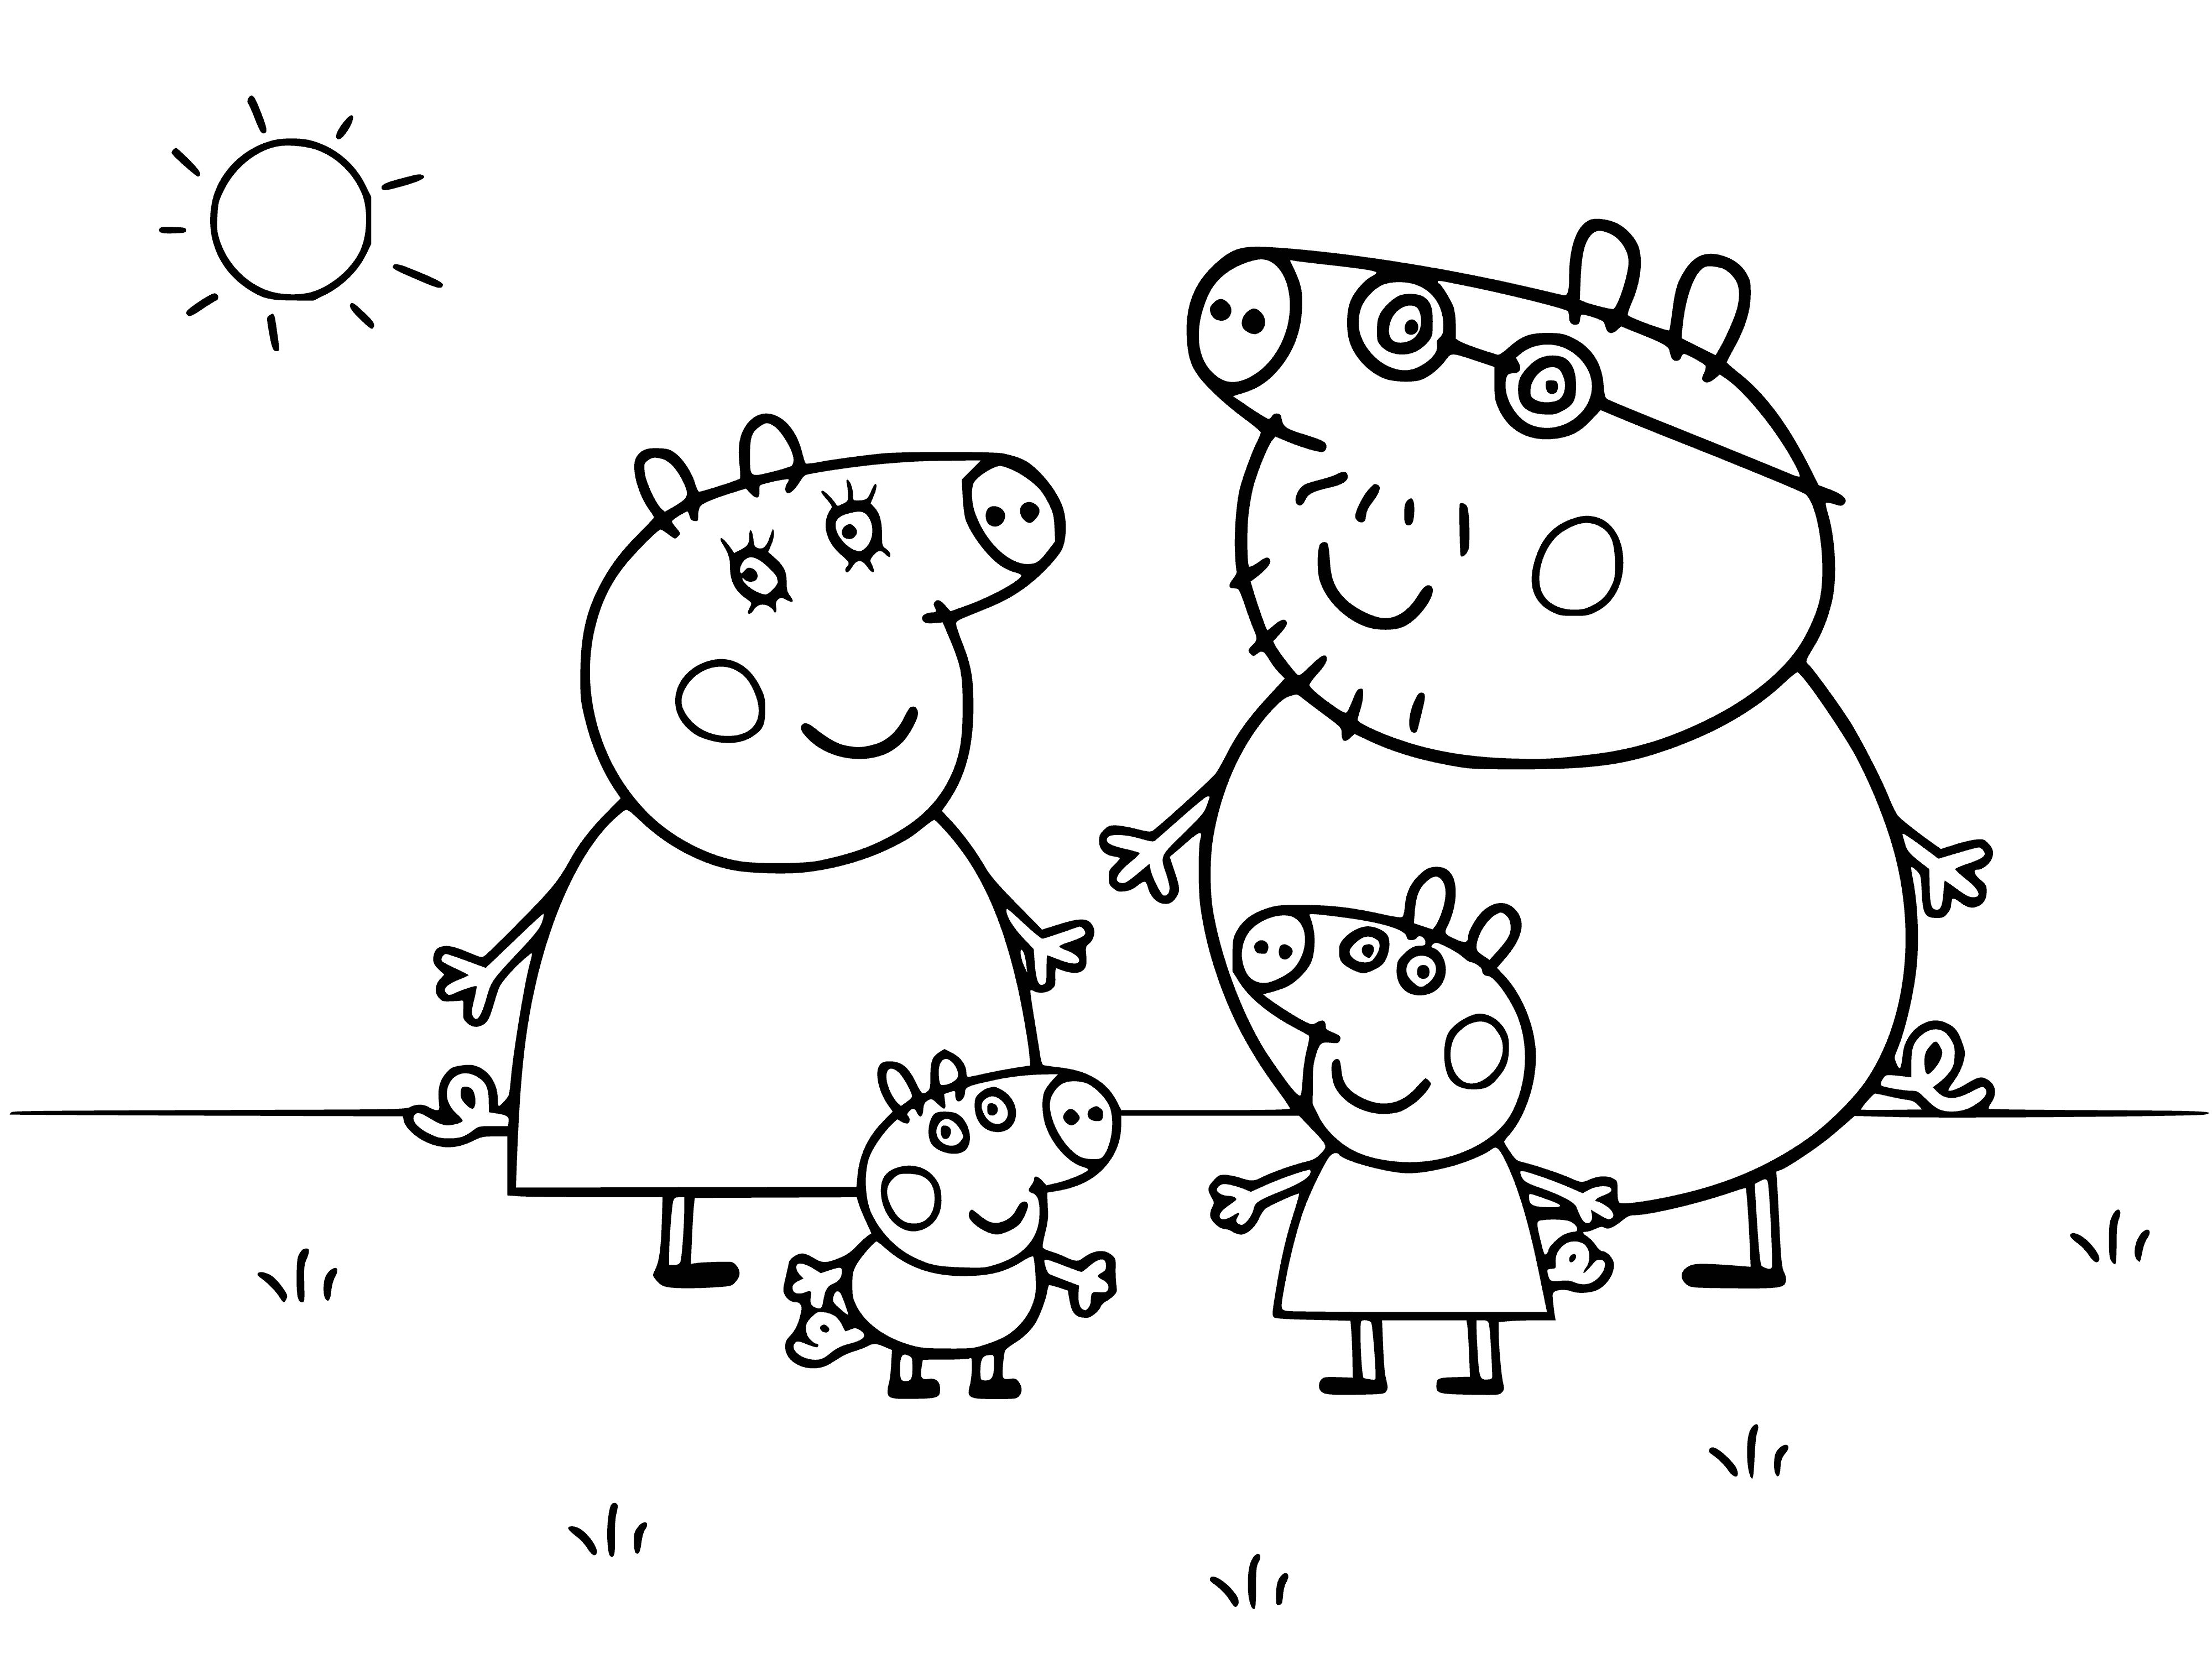 coloring page: Family of four pigs happily walking hand-in-hand through a green field, children smiling behind them.